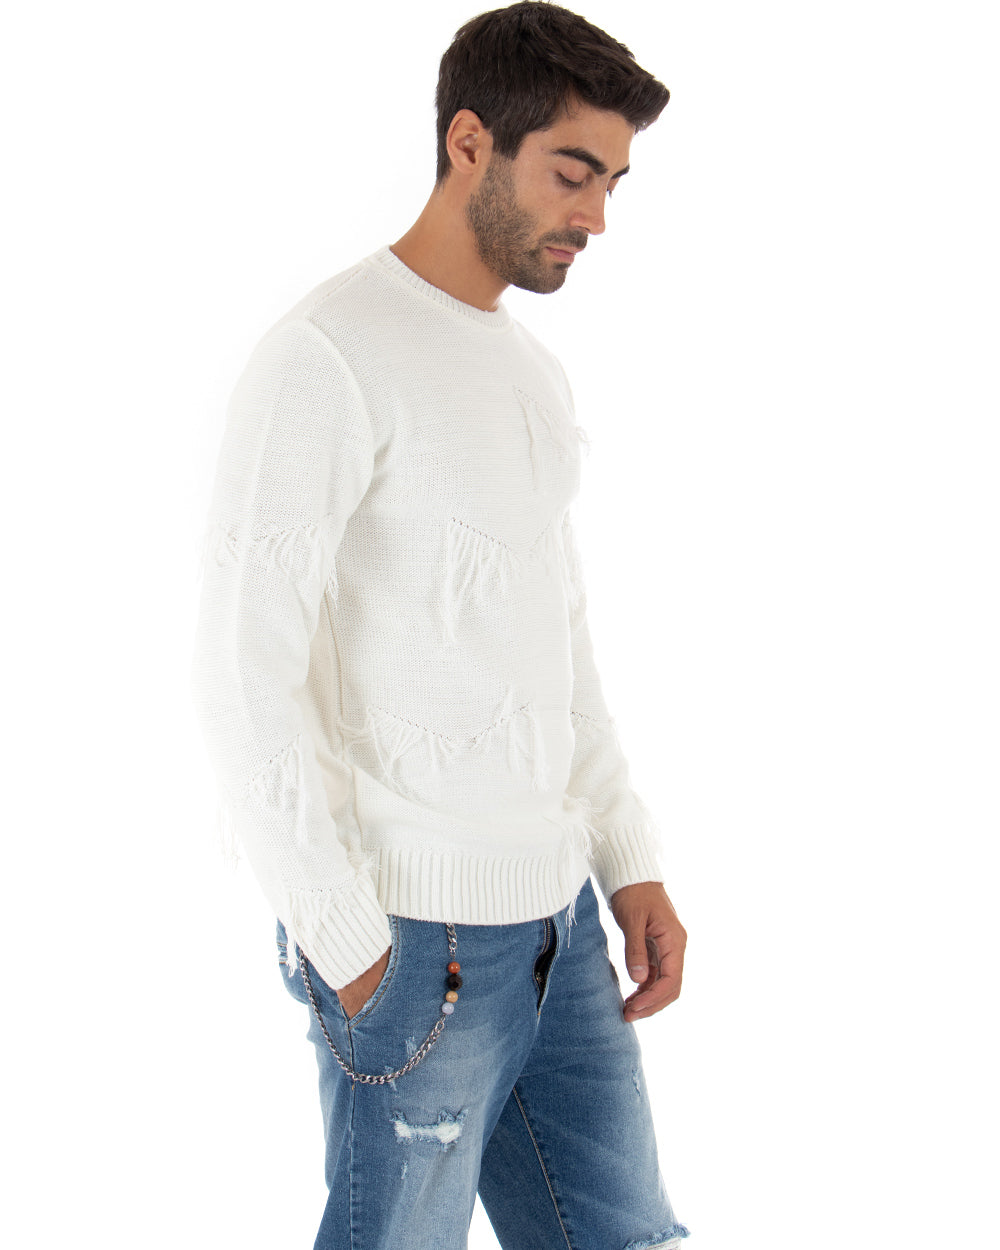 Men's Sweater Long Sleeves Fringed Solid Color White Casual GIOSAL